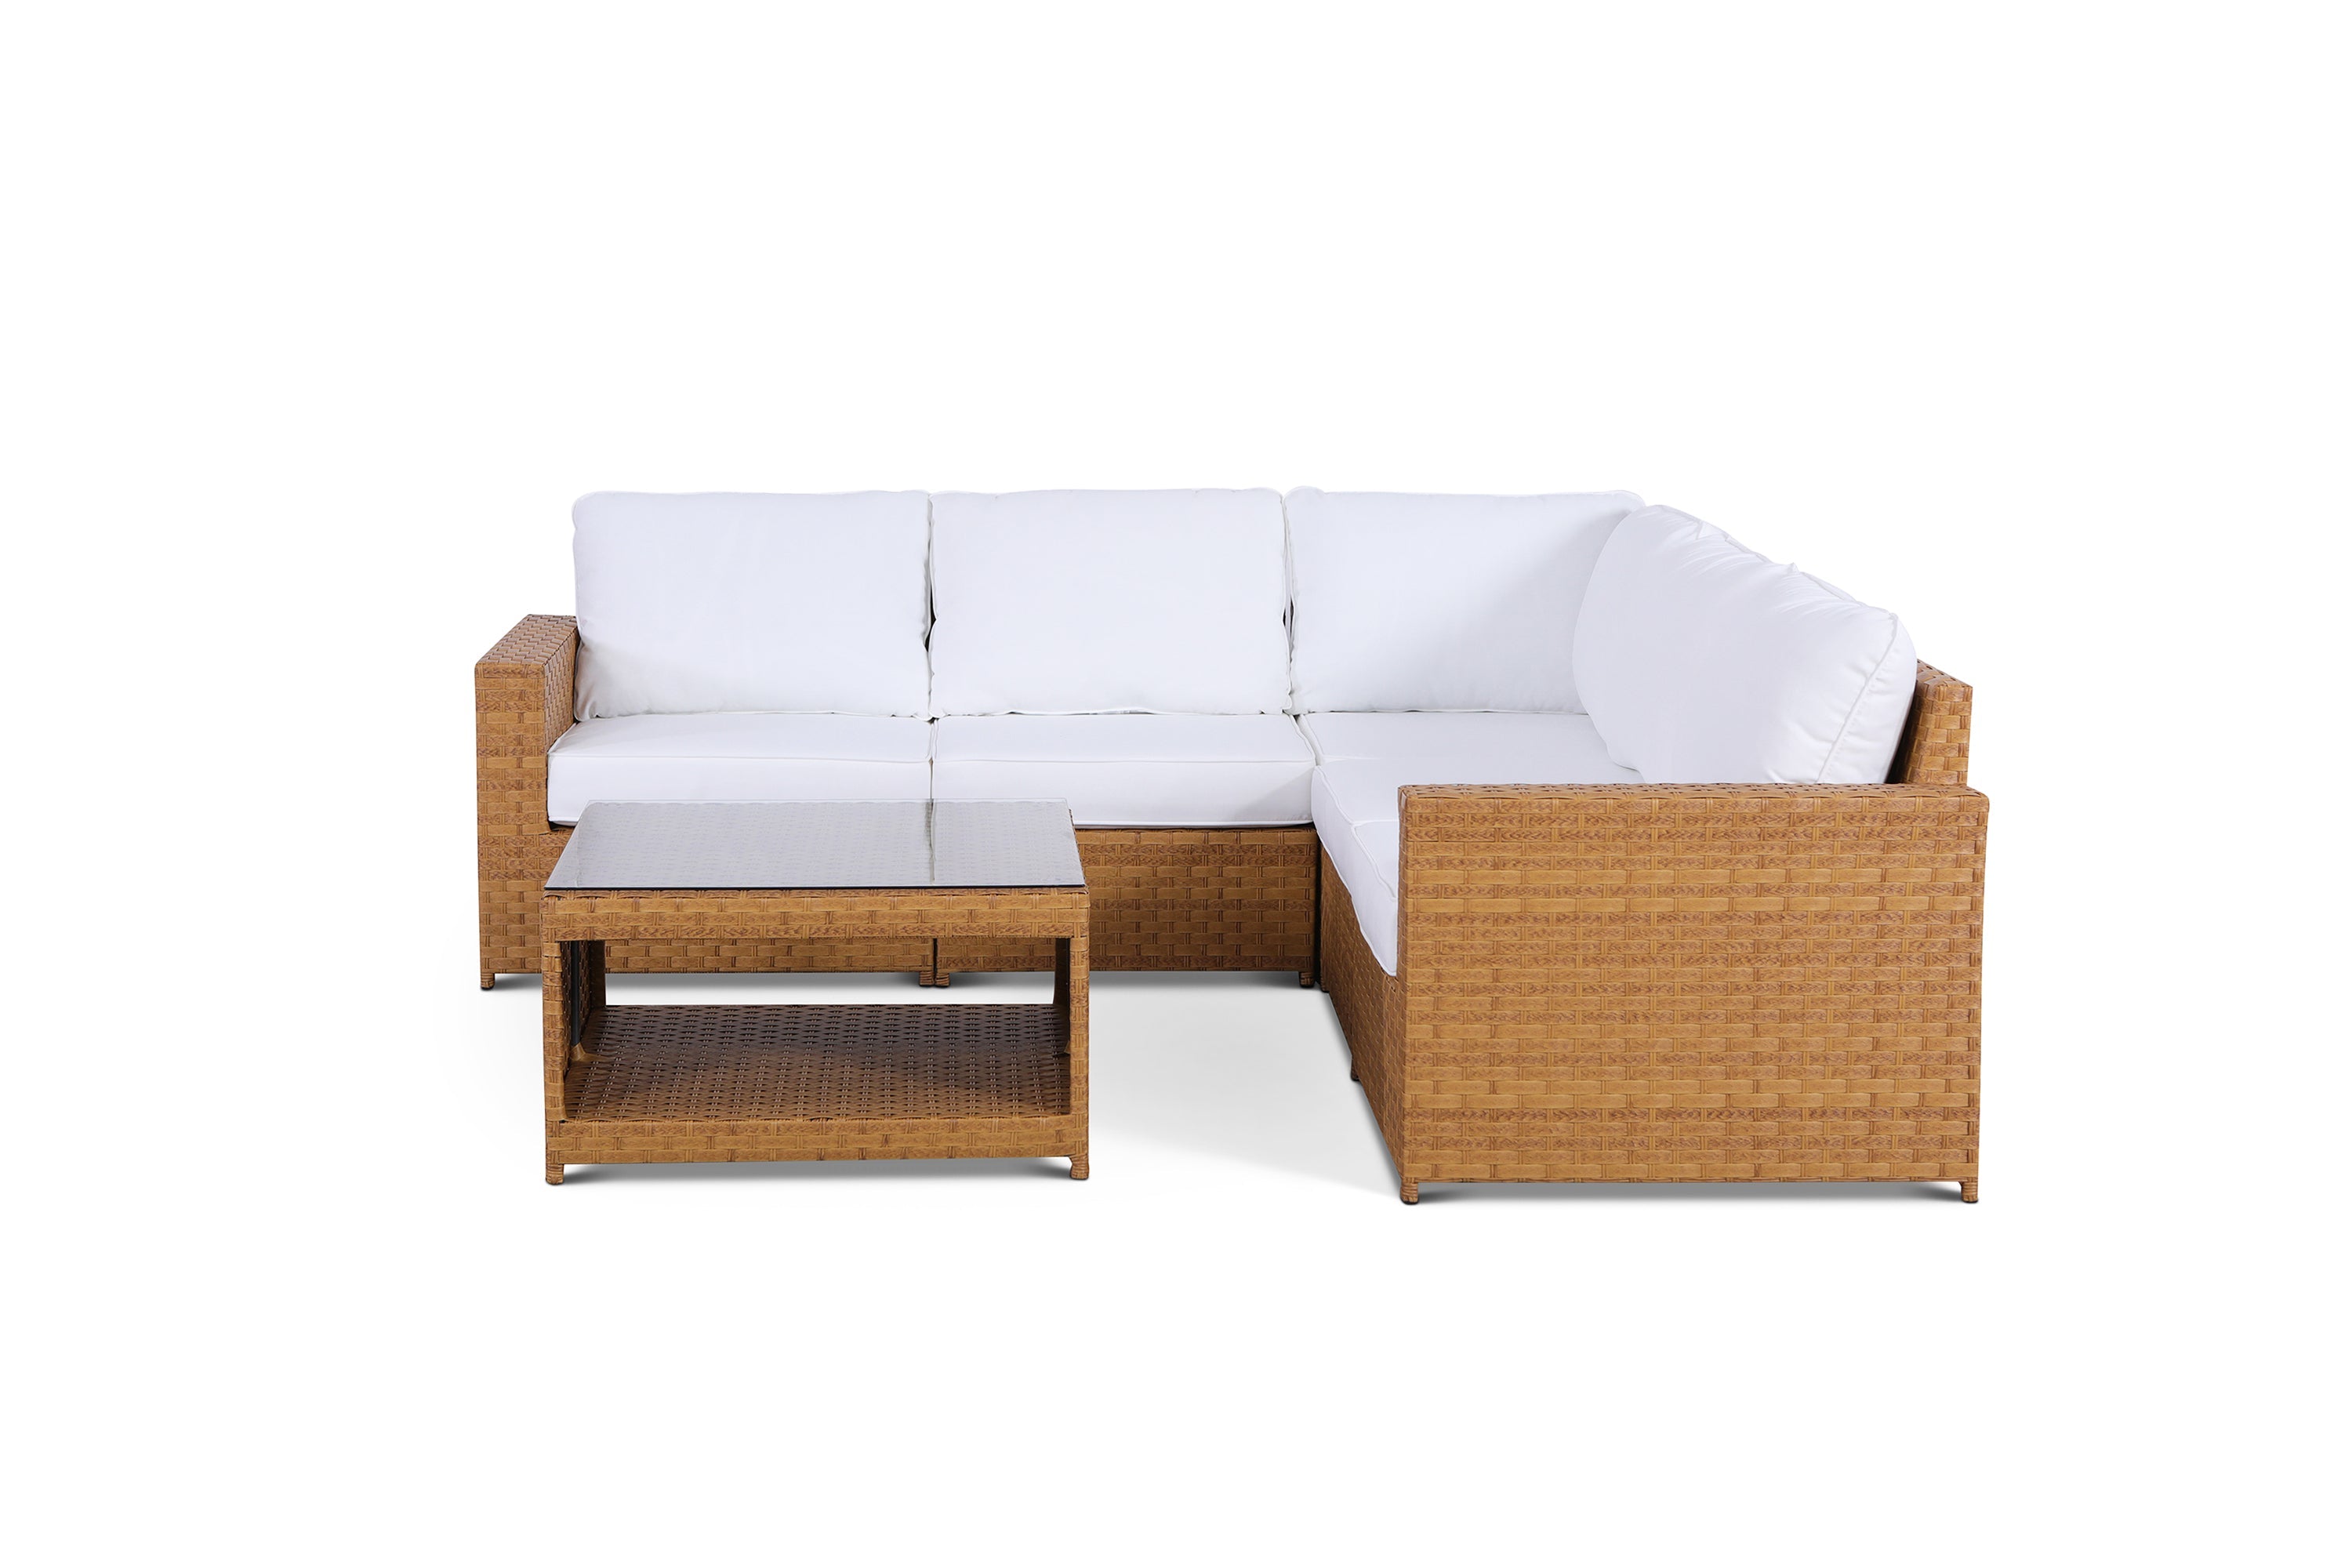 Seabrook 6 Piece Outdoor Sectional Set